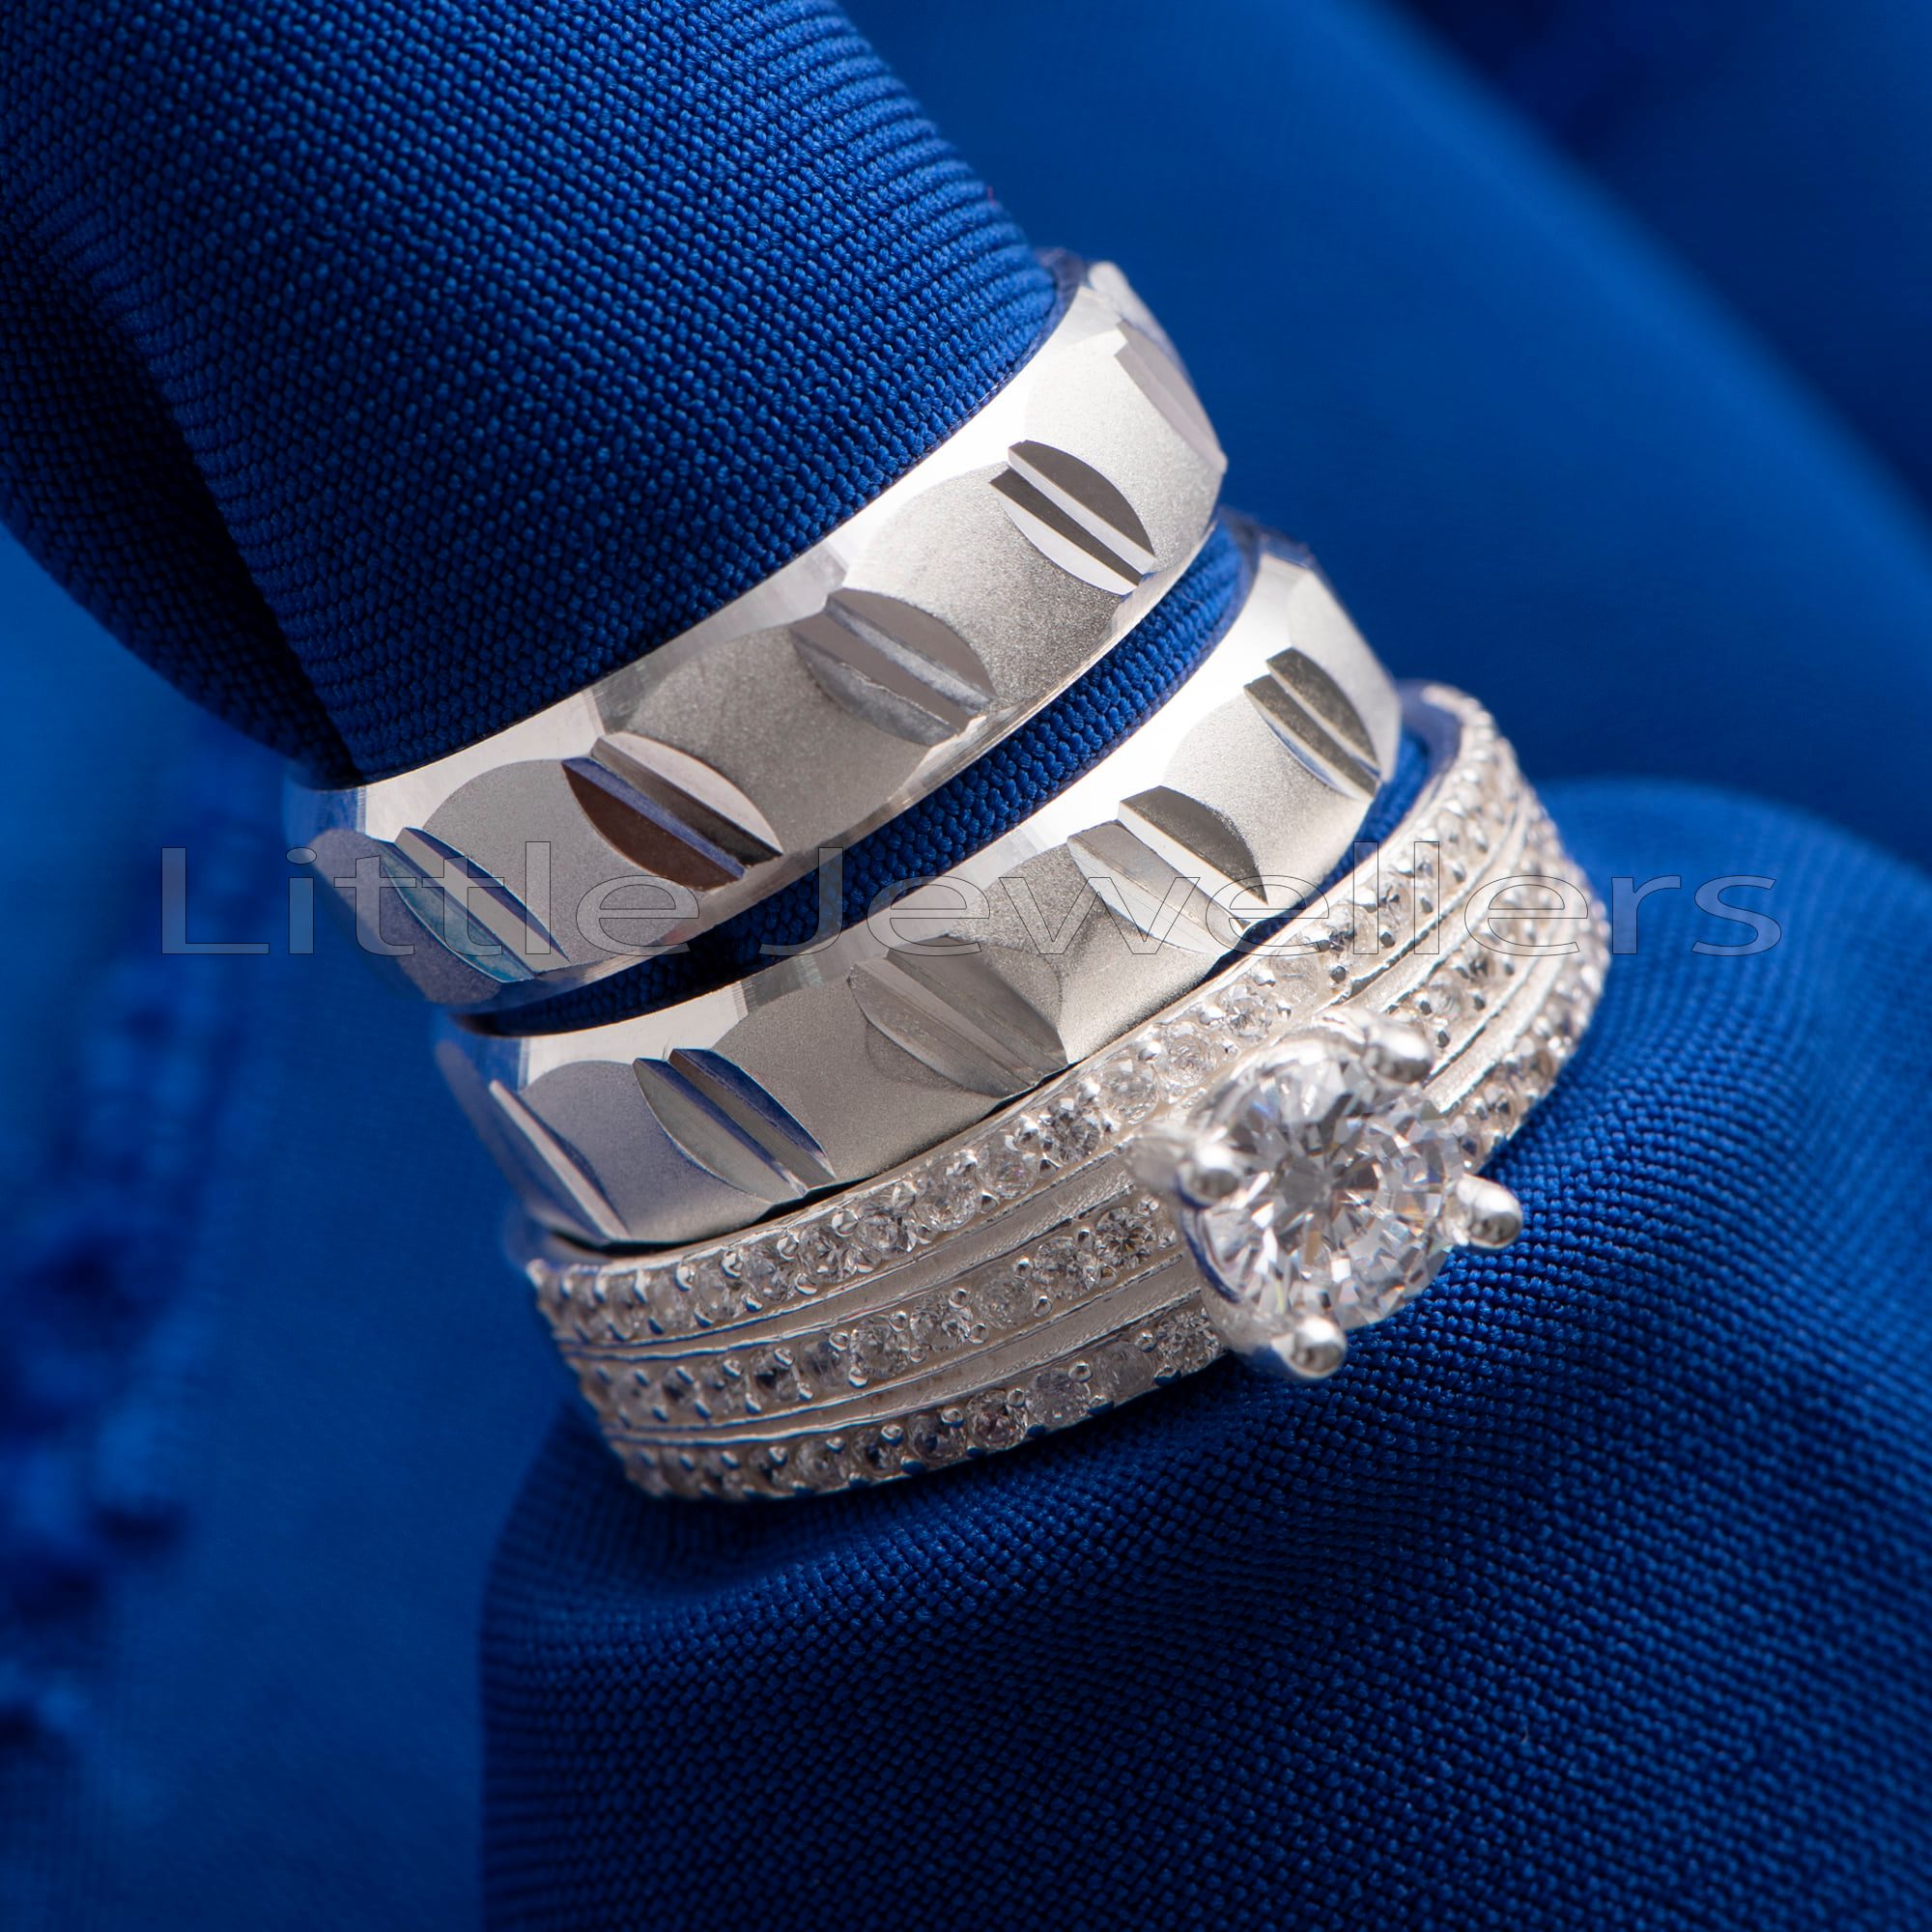 Darry Ring | Natural Diamond Engagement Rings, Wedding Rings & Jewelry